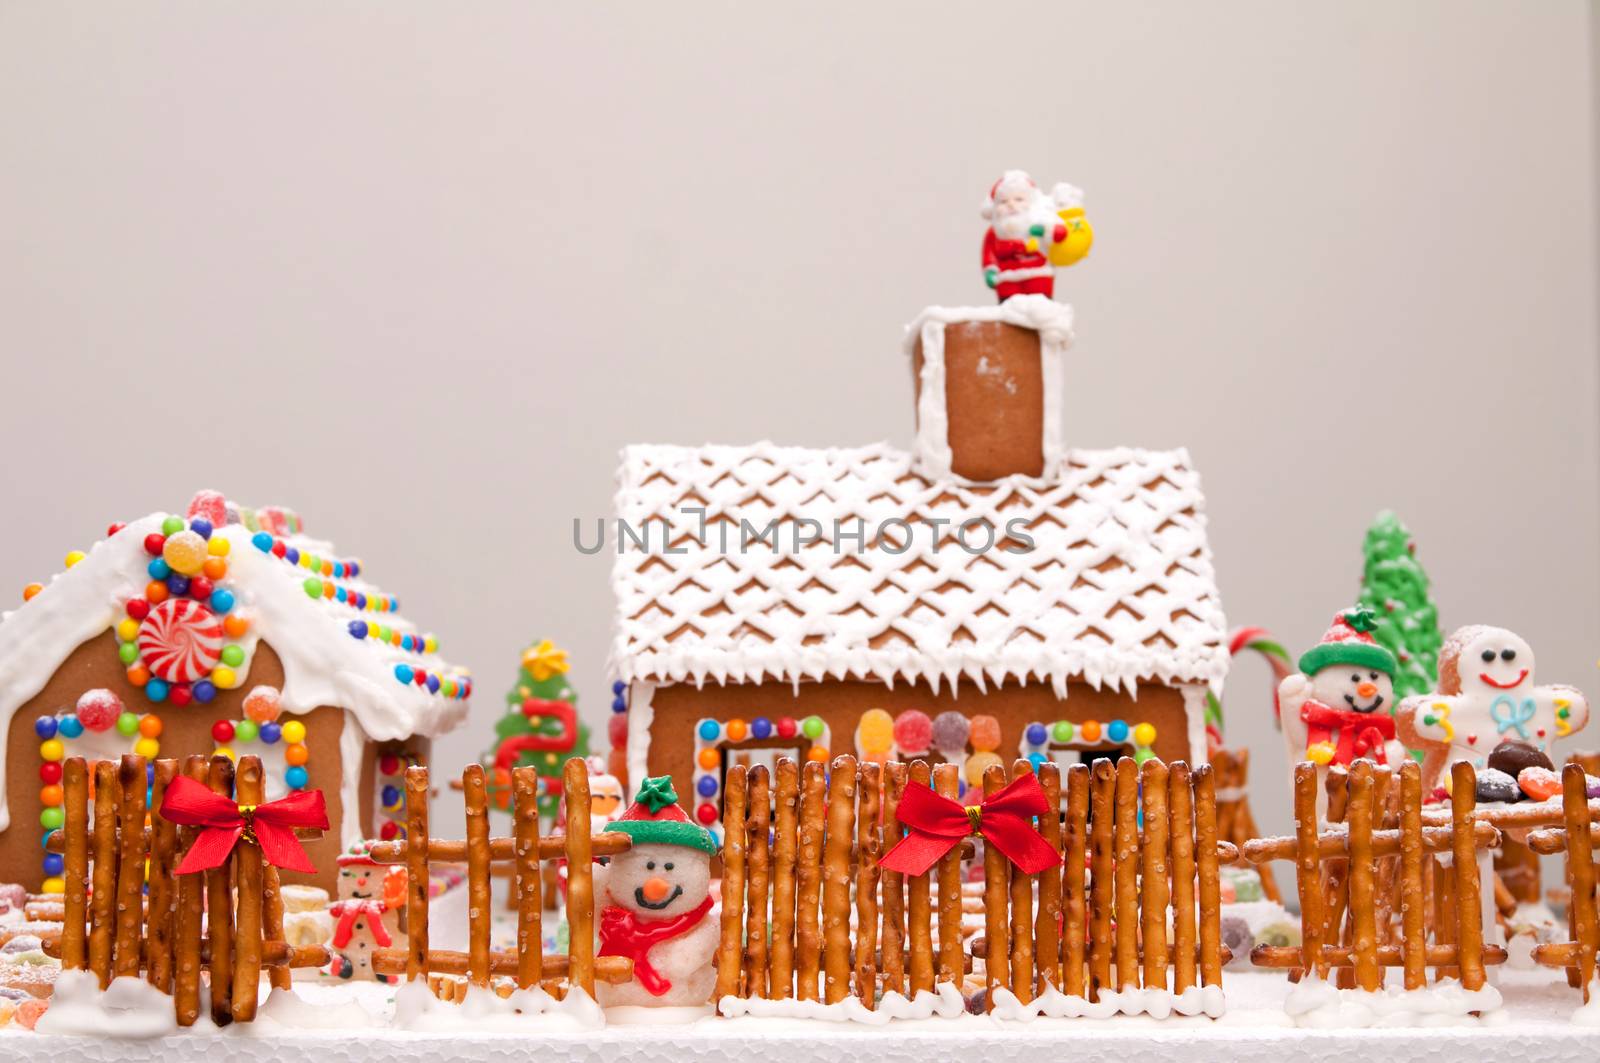 Gingerbread house with fences around